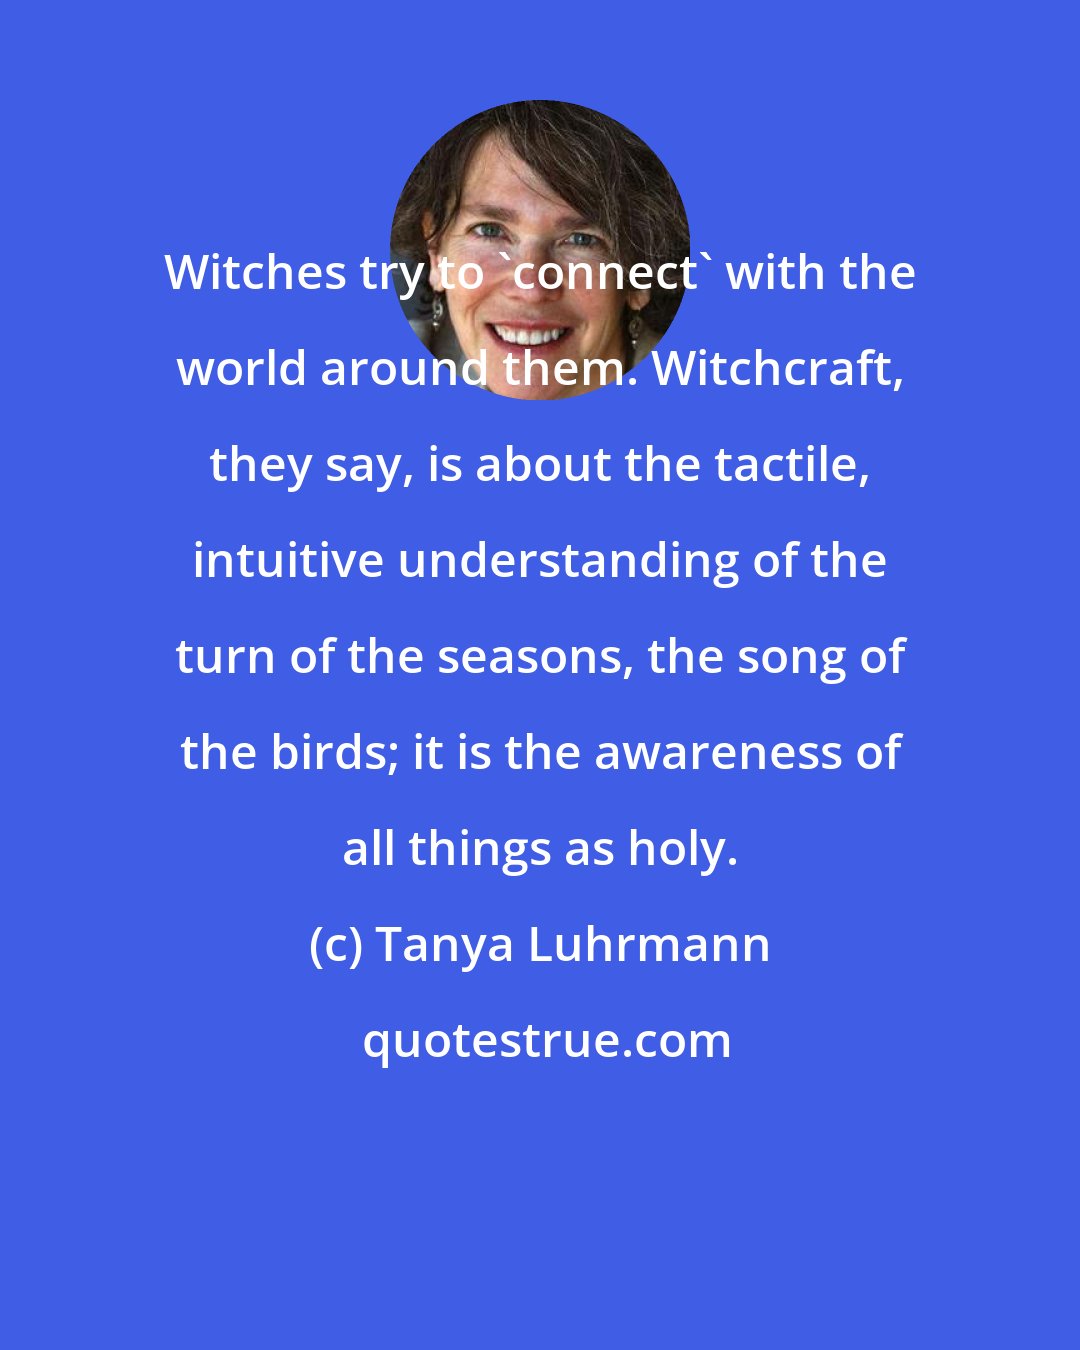 Tanya Luhrmann: Witches try to 'connect' with the world around them. Witchcraft, they say, is about the tactile, intuitive understanding of the turn of the seasons, the song of the birds; it is the awareness of all things as holy.